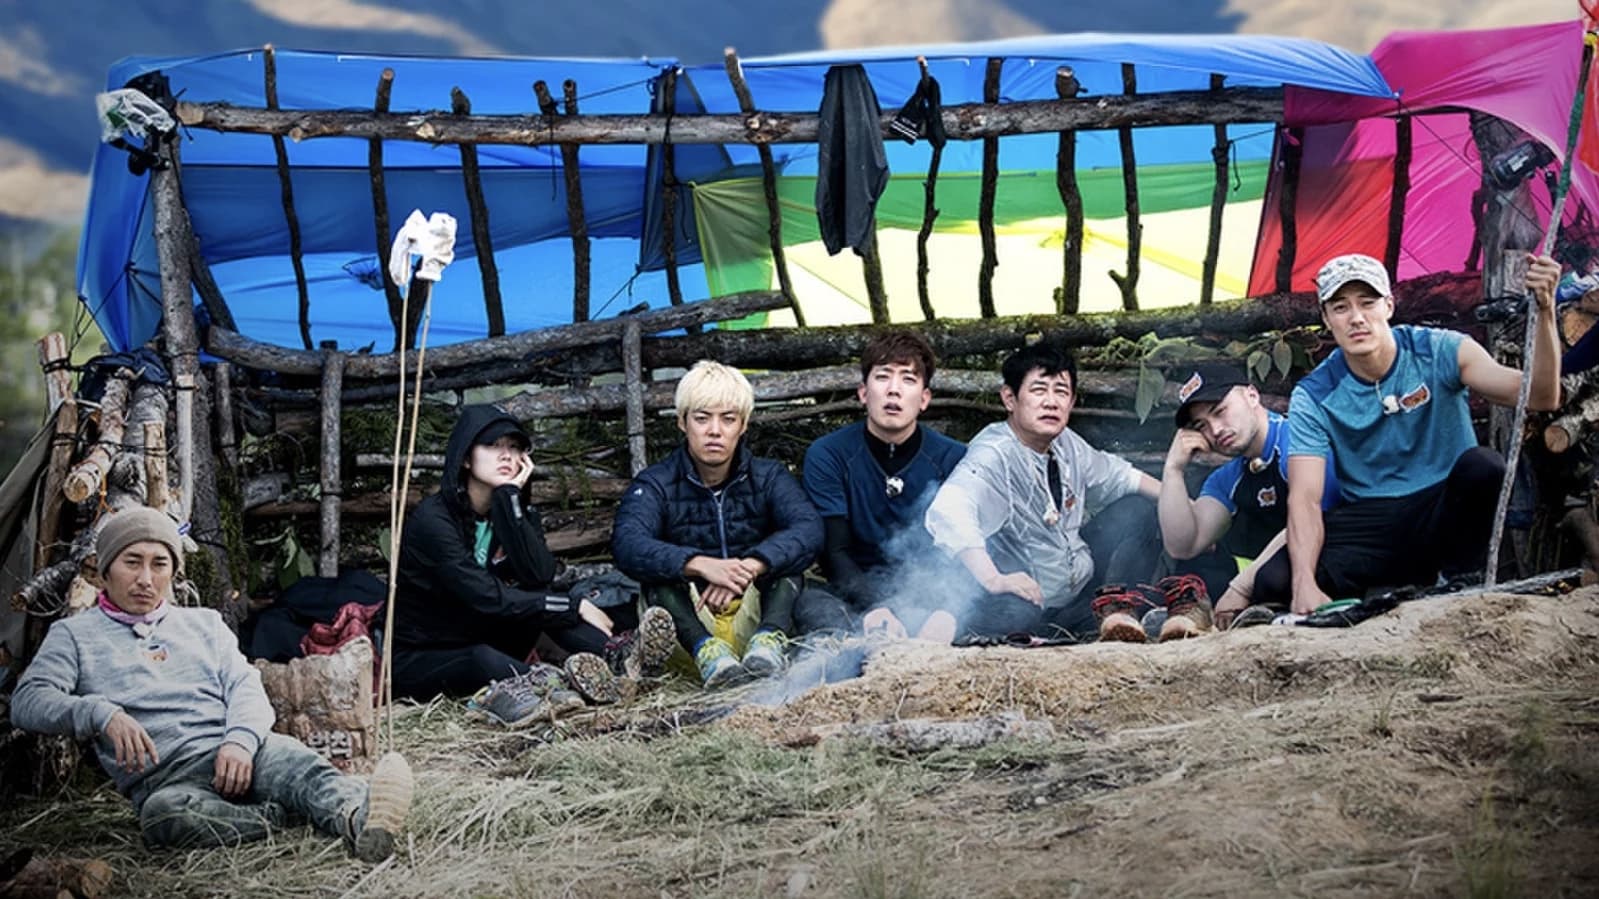 Law Of The Jungle in New Zealand - North Island (1)